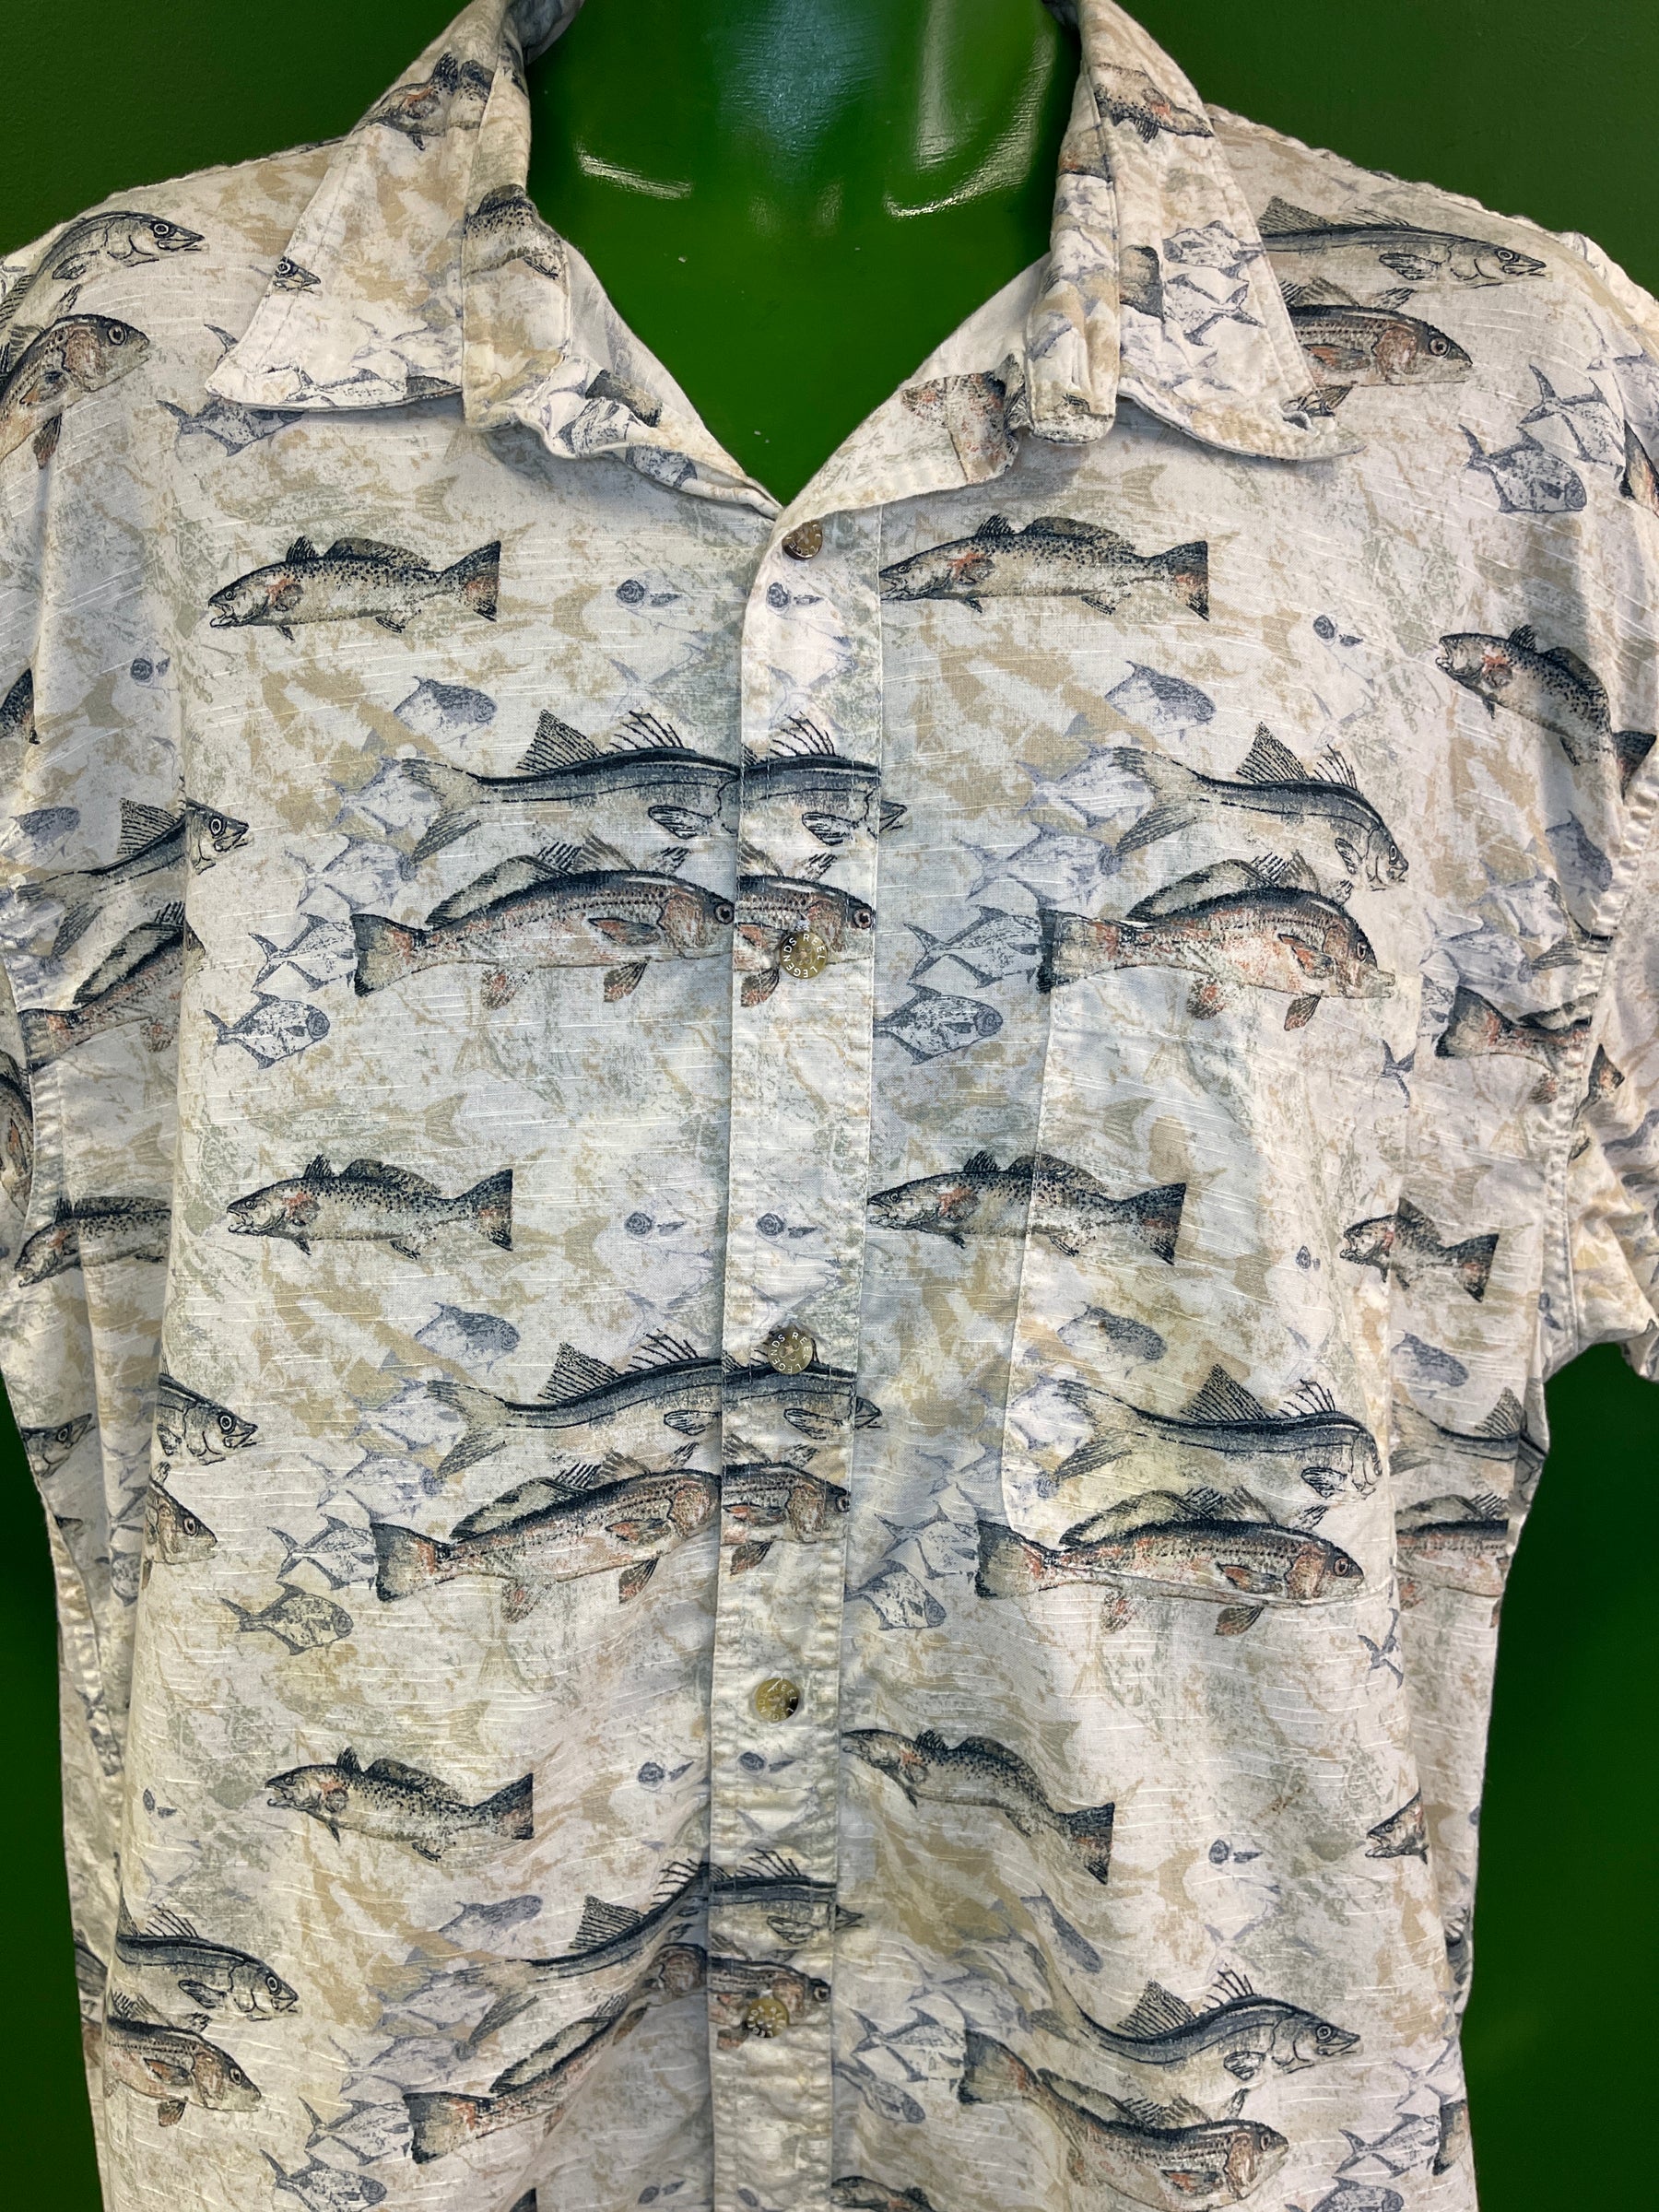 Quirky Fish Pattern 100% Cotton Button-Up Shirt Men's 2X-Large